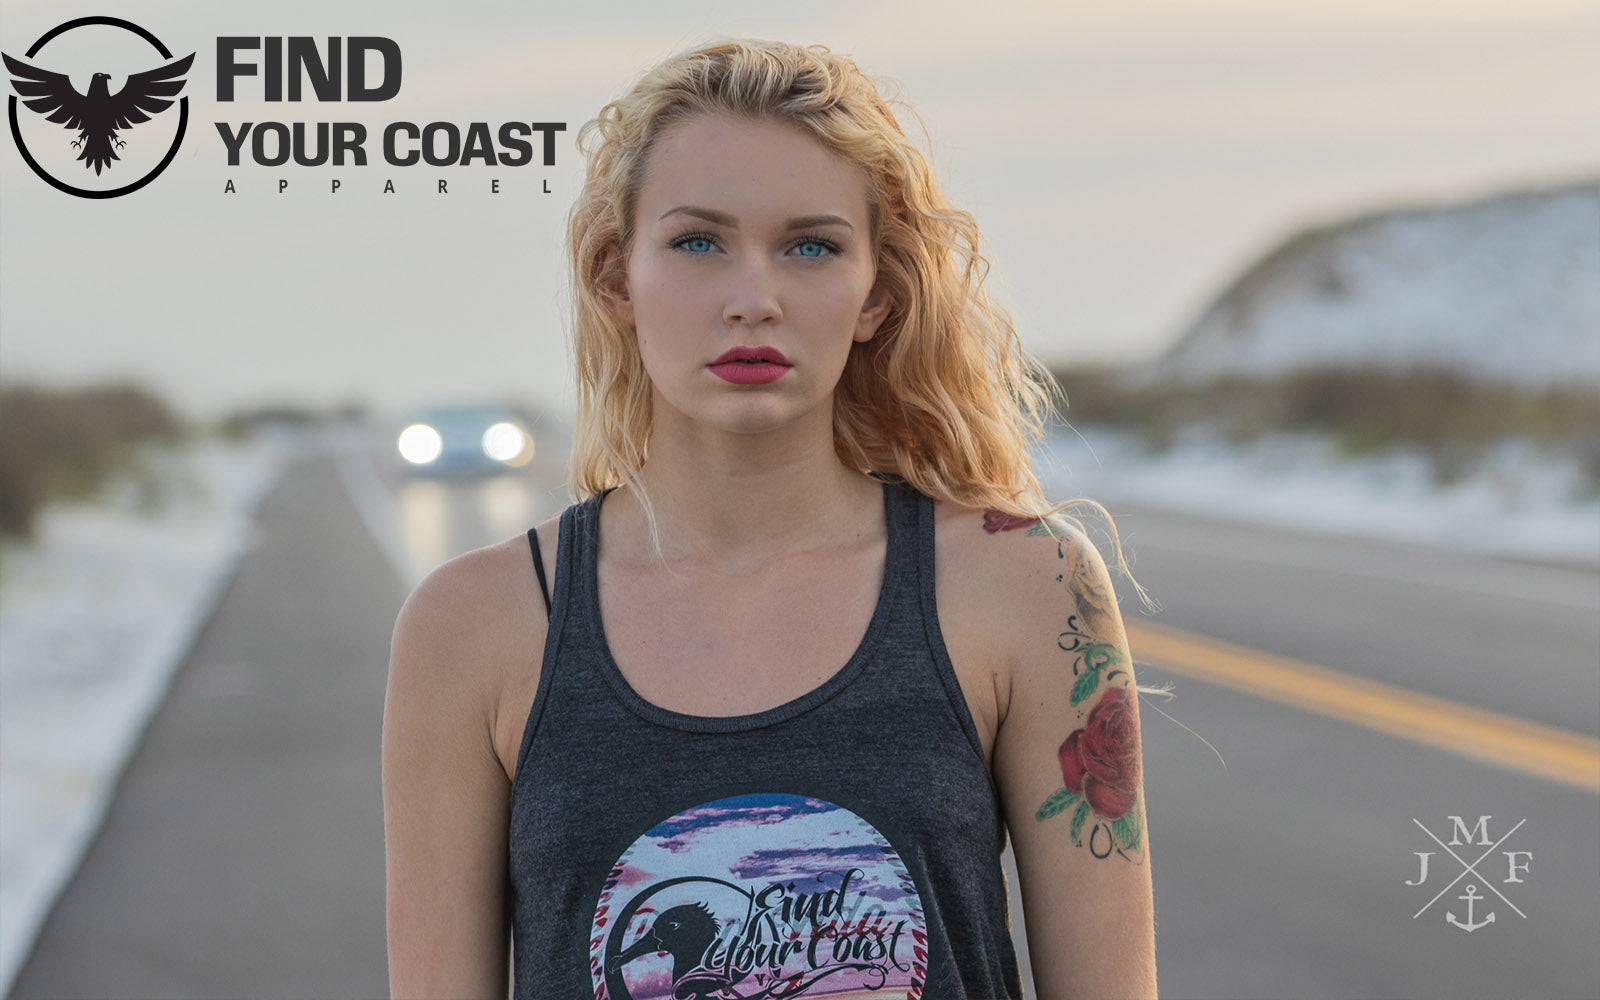 Find Your Coast Apparel Brand Maintains Its Commitment to Fashion